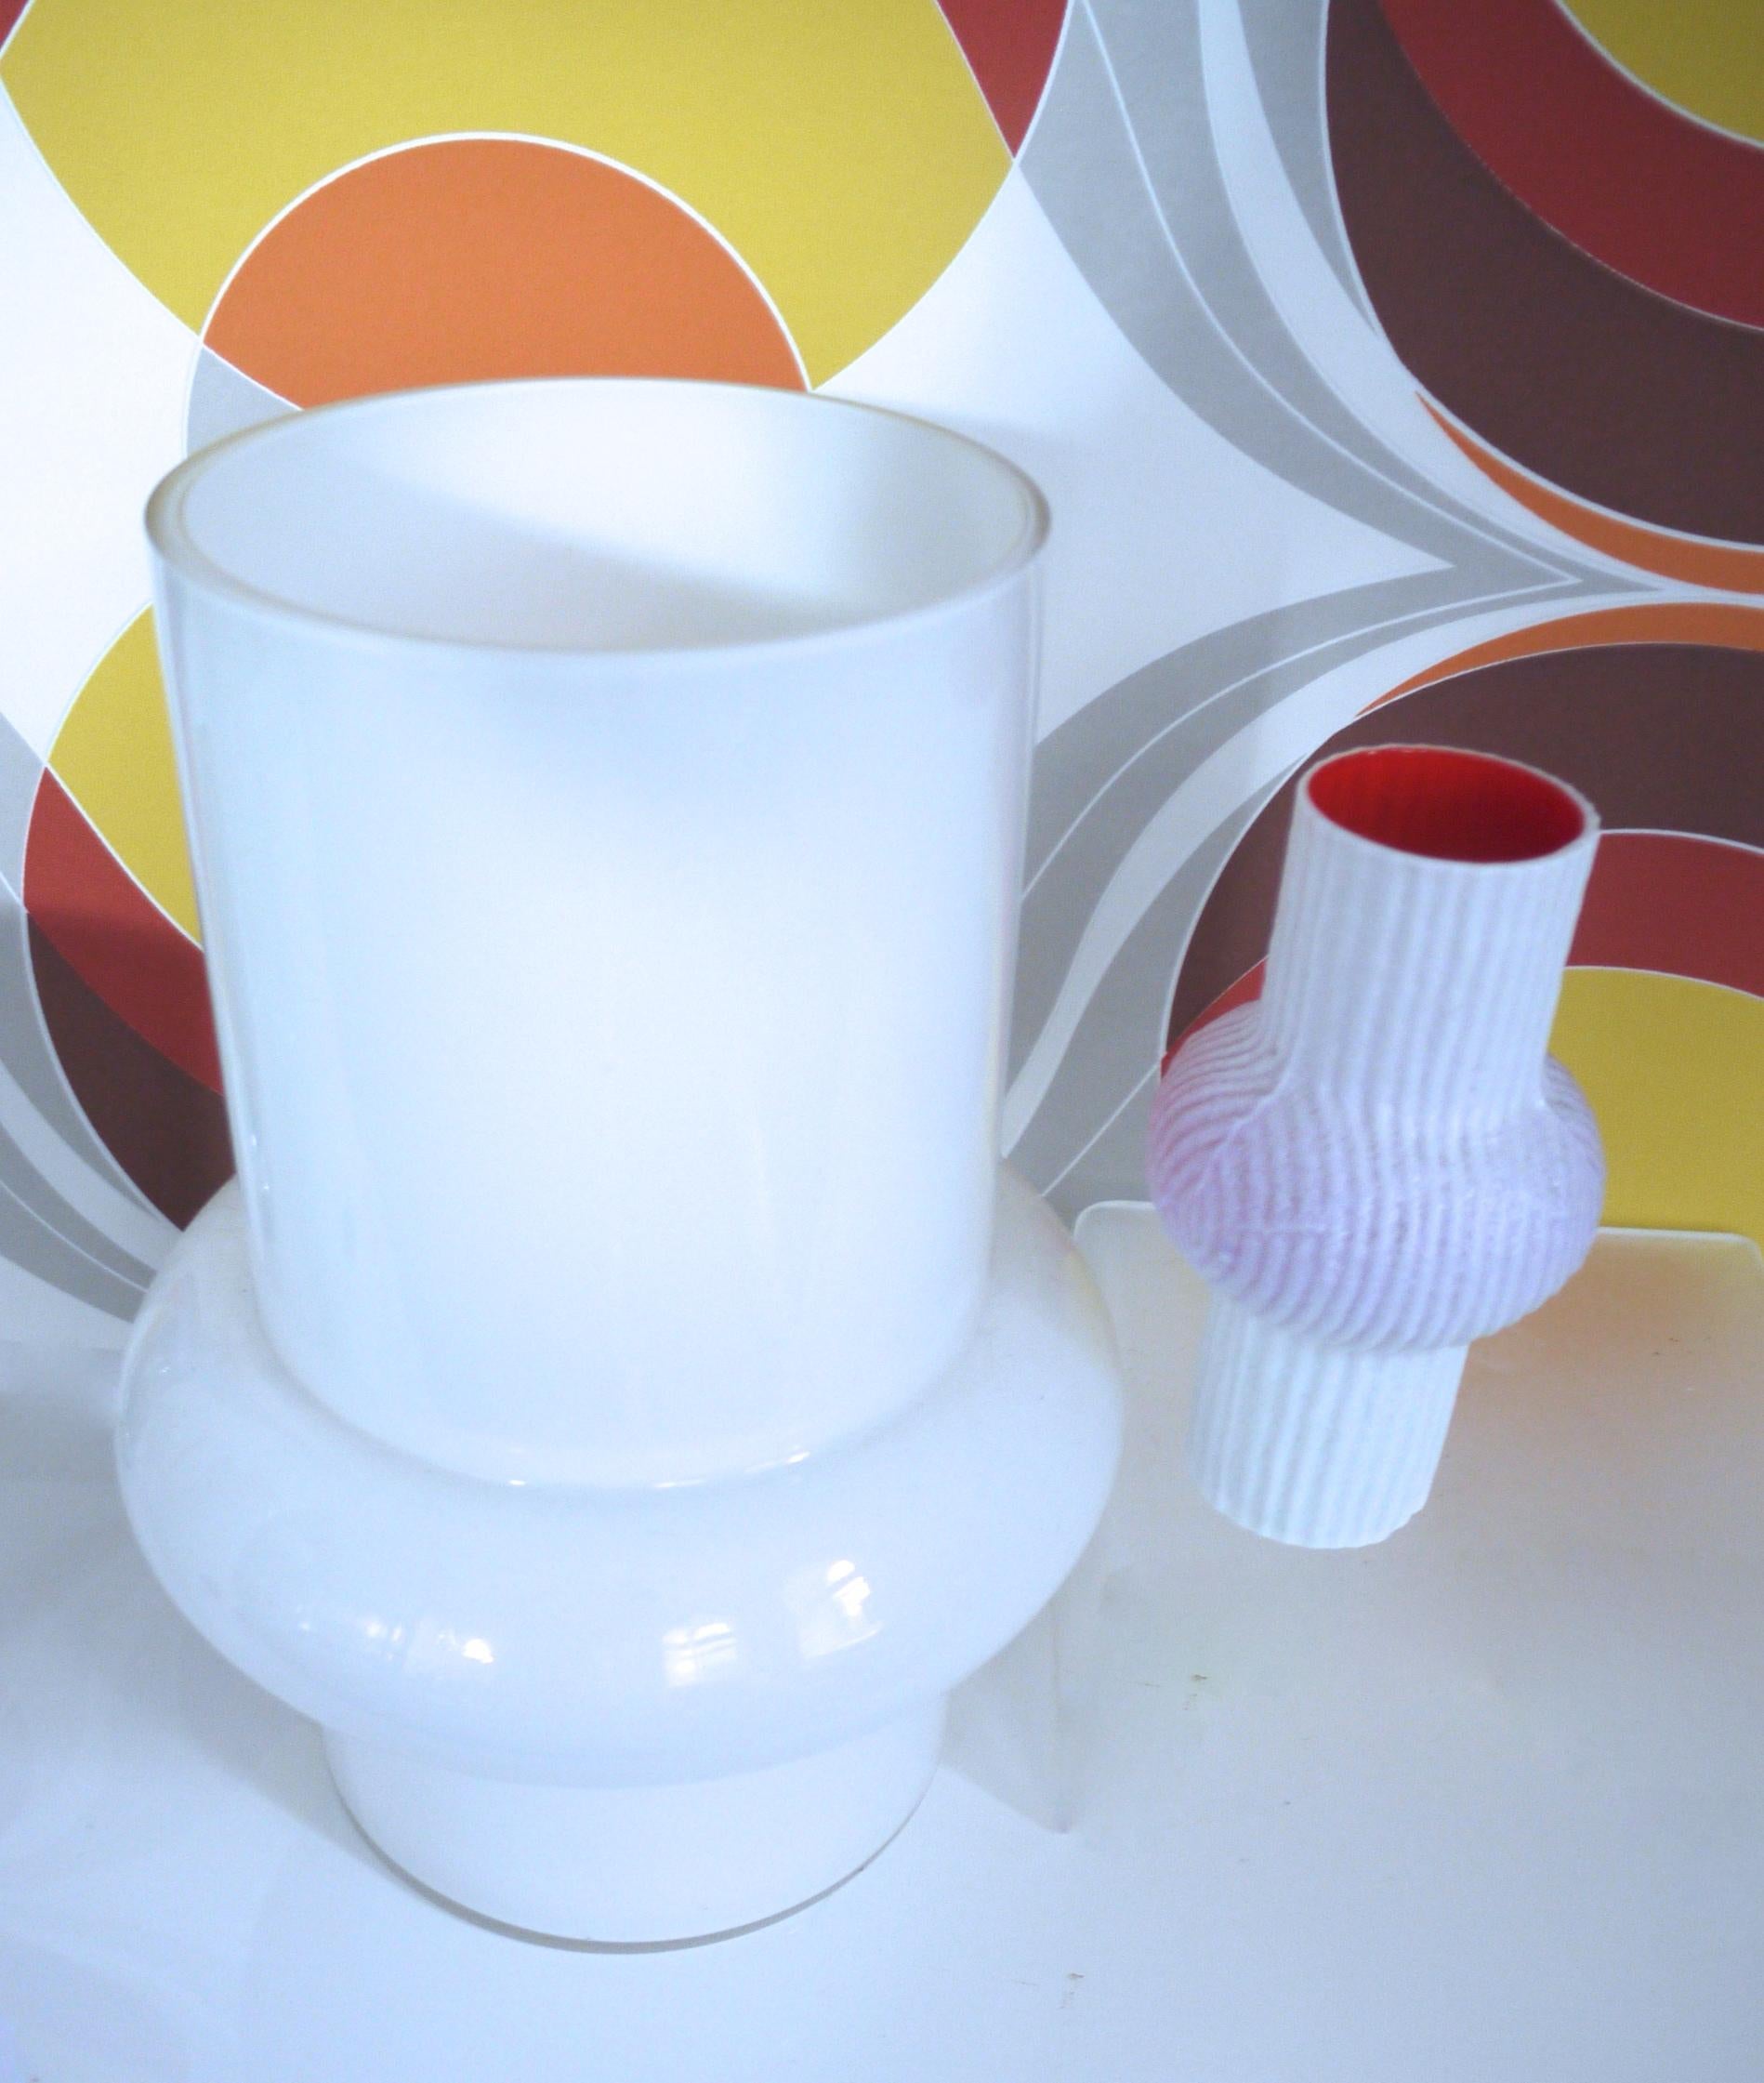 Italian Modernist Scandinavian/Murano Space Age White Glass Vases from Late 1950s-1960s For Sale